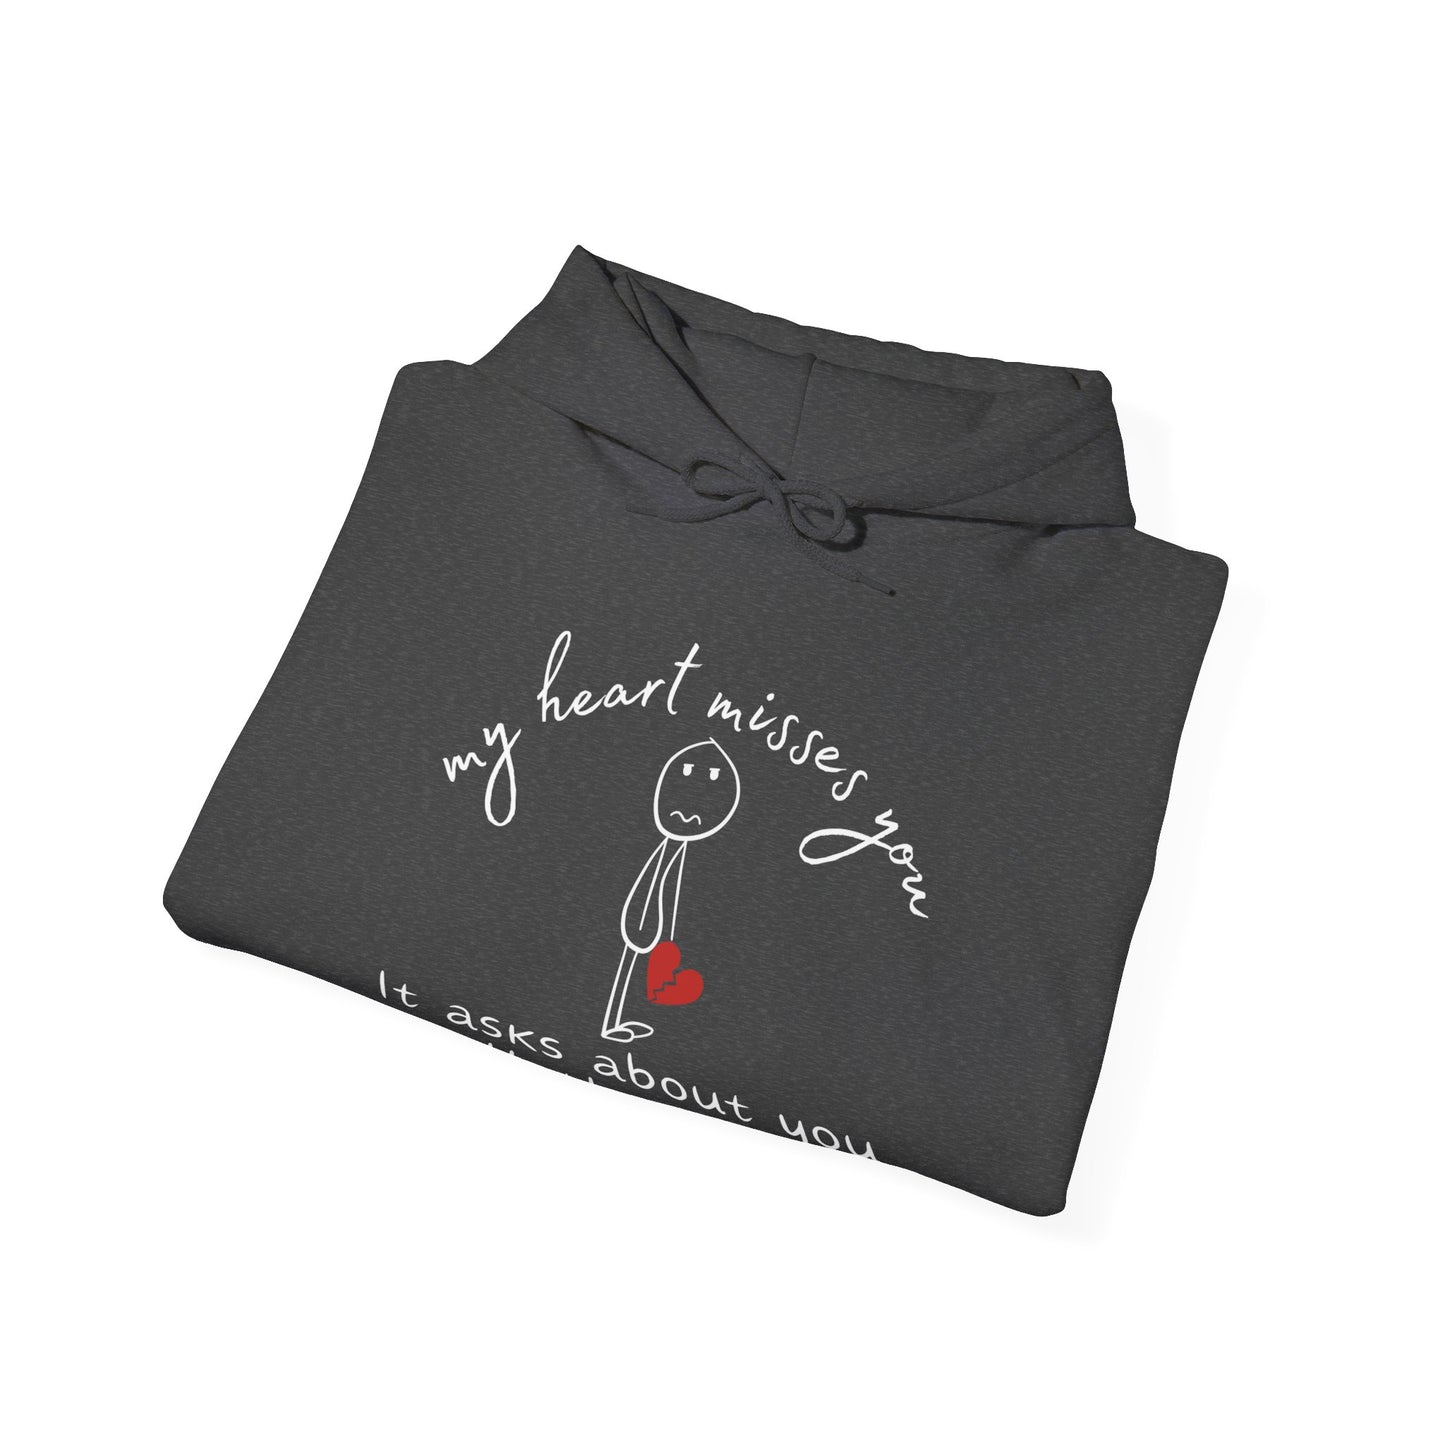 Dark Heather Gildan 18500 Hoodie sweatshirt. "My heart misses you, it asks about you all the time" with a grieving stick figure.